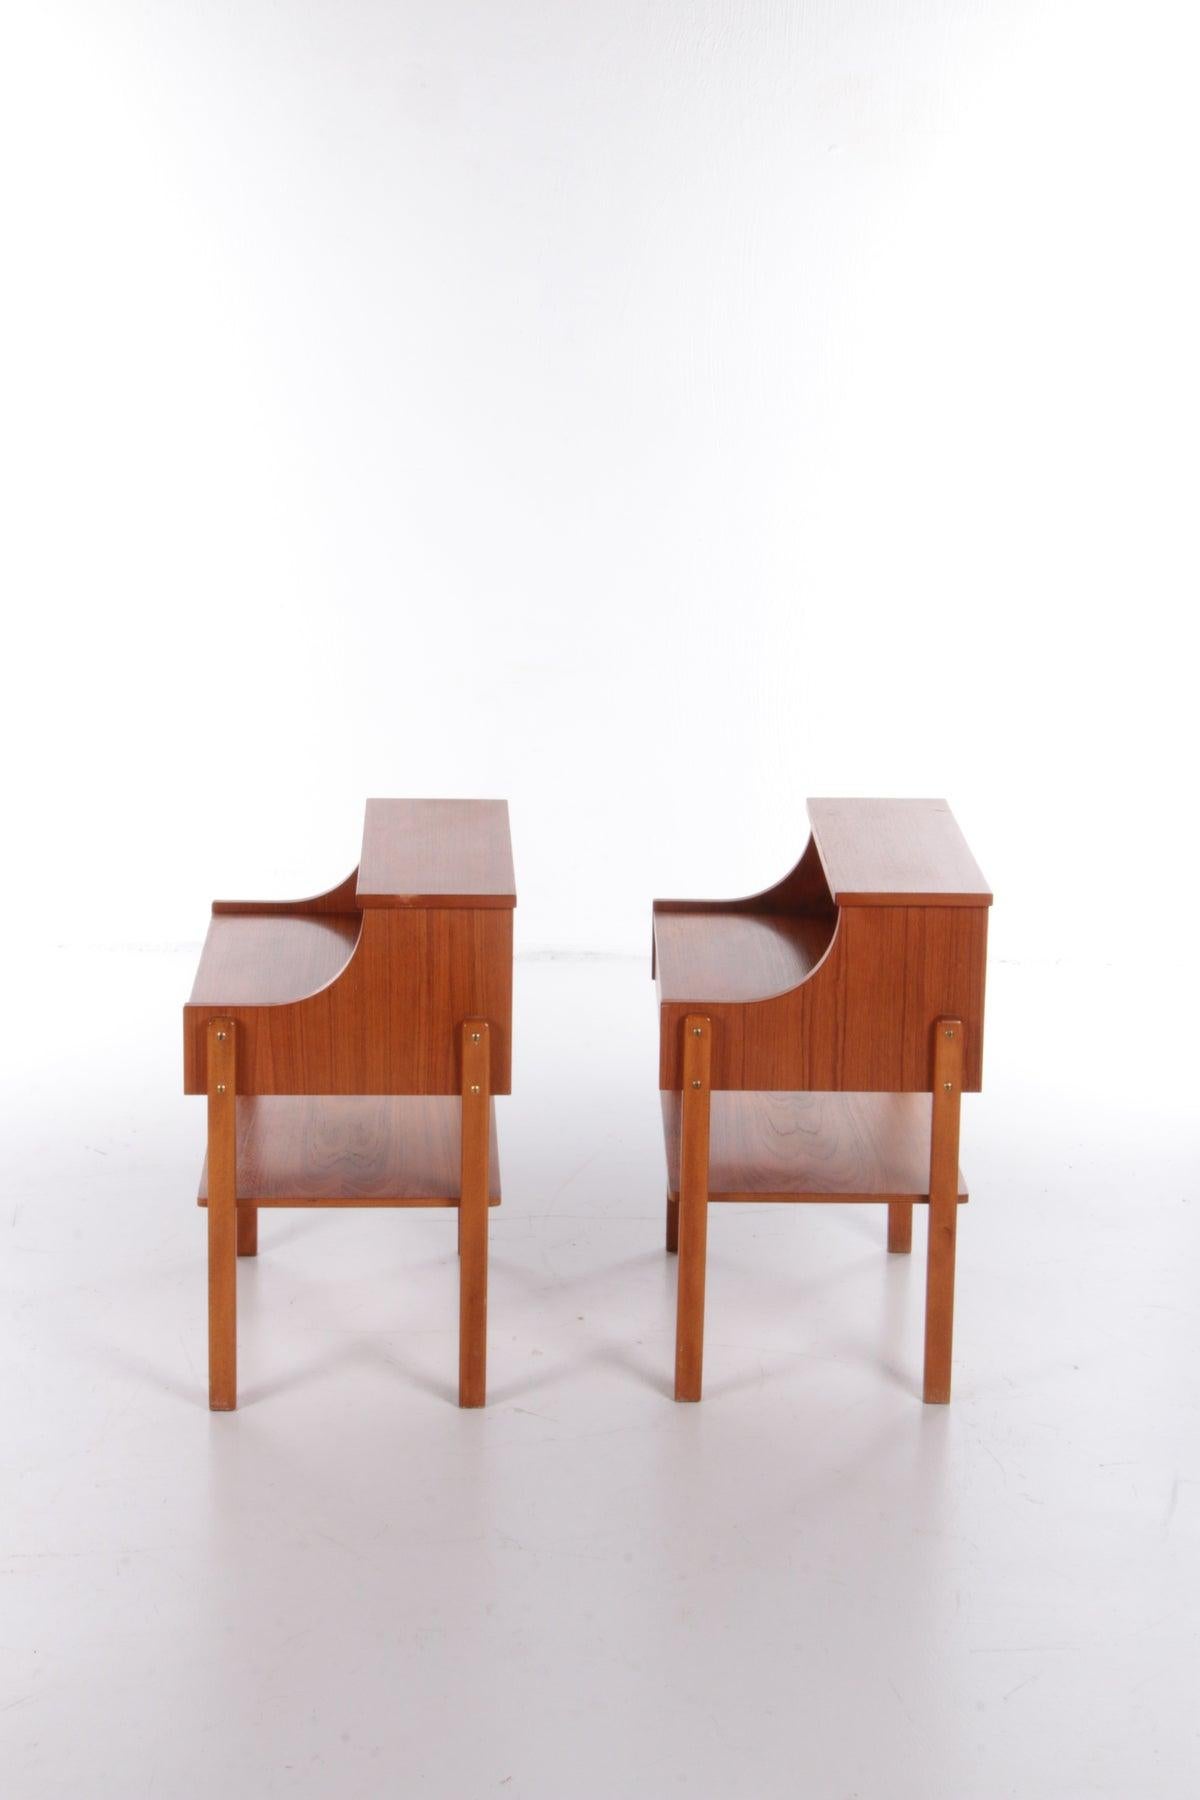 Swedish Pair of Scandinavian Bedside Tables in Teak by AB Carlstrom & Co, 1960 For Sale